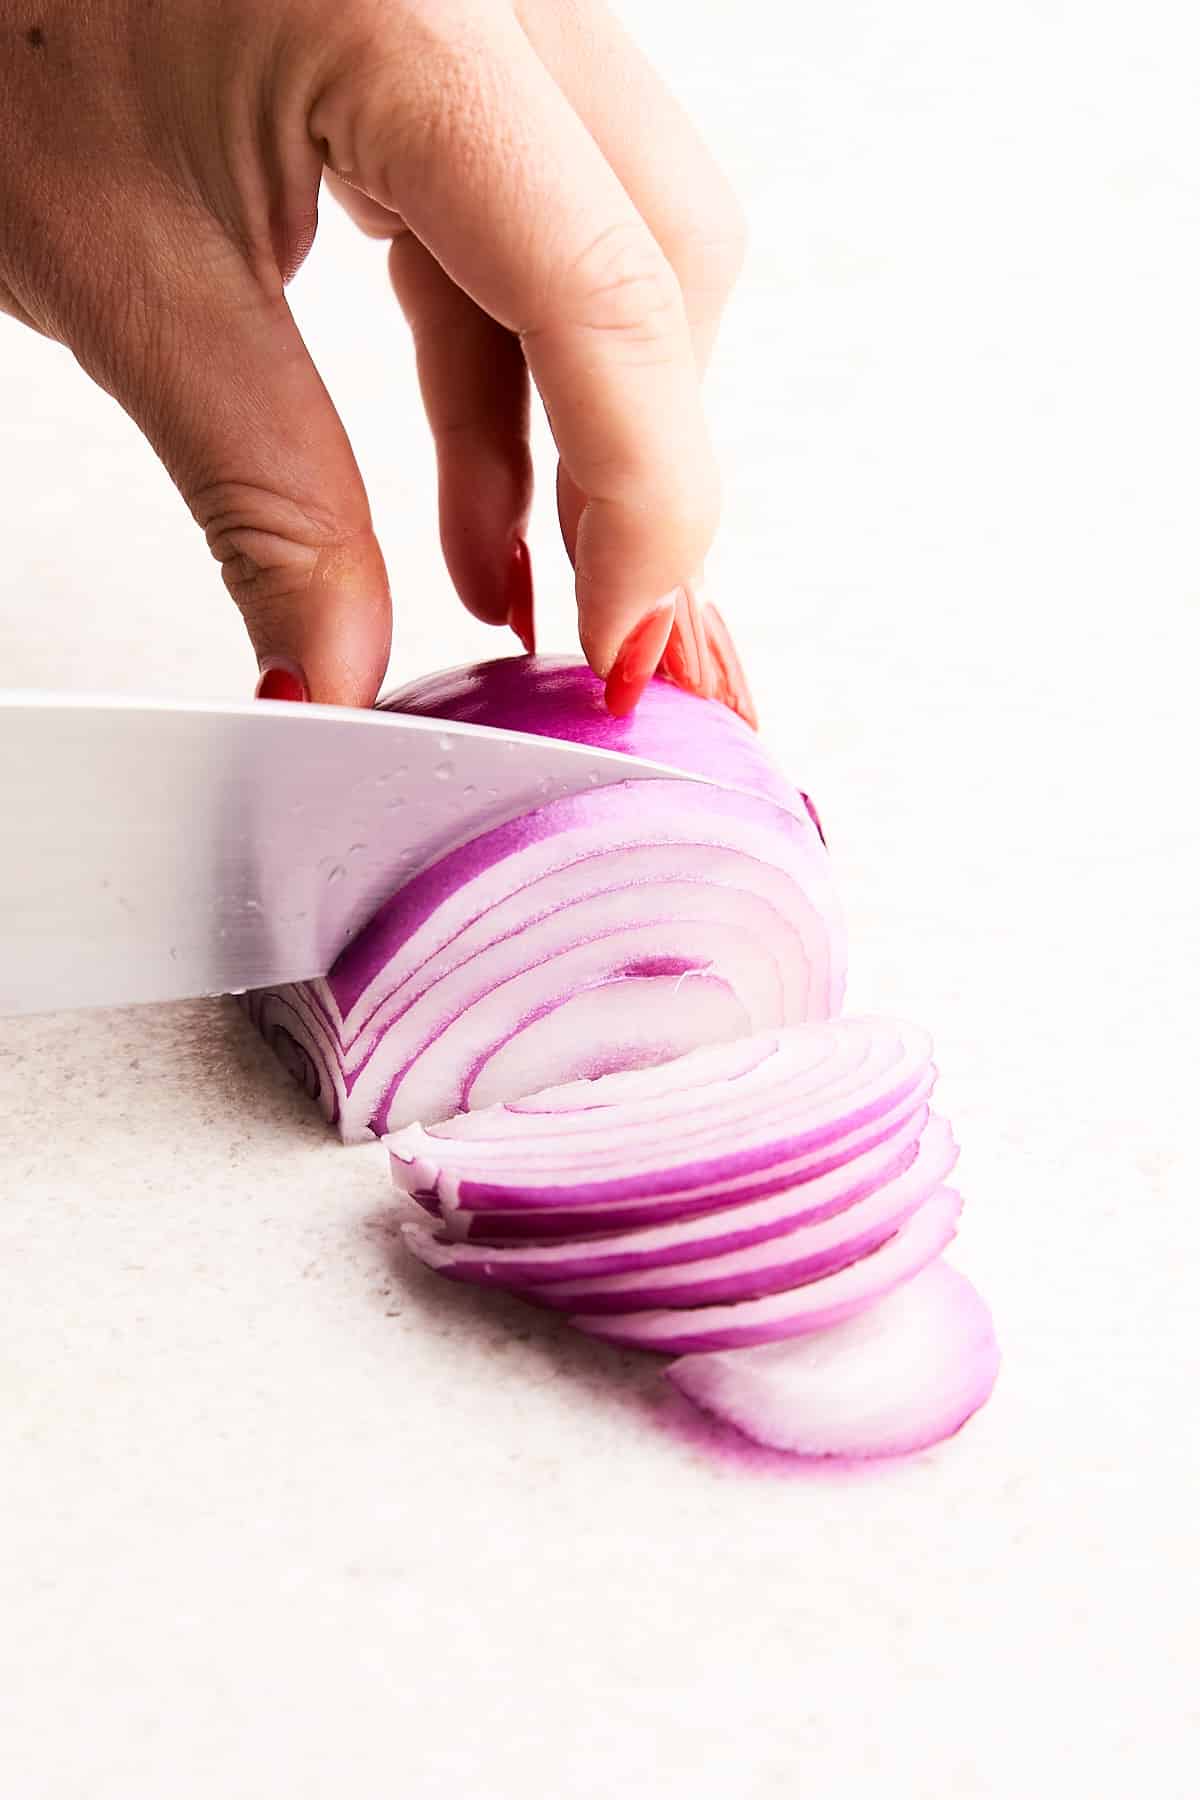 Slicing an onion lengthwise.